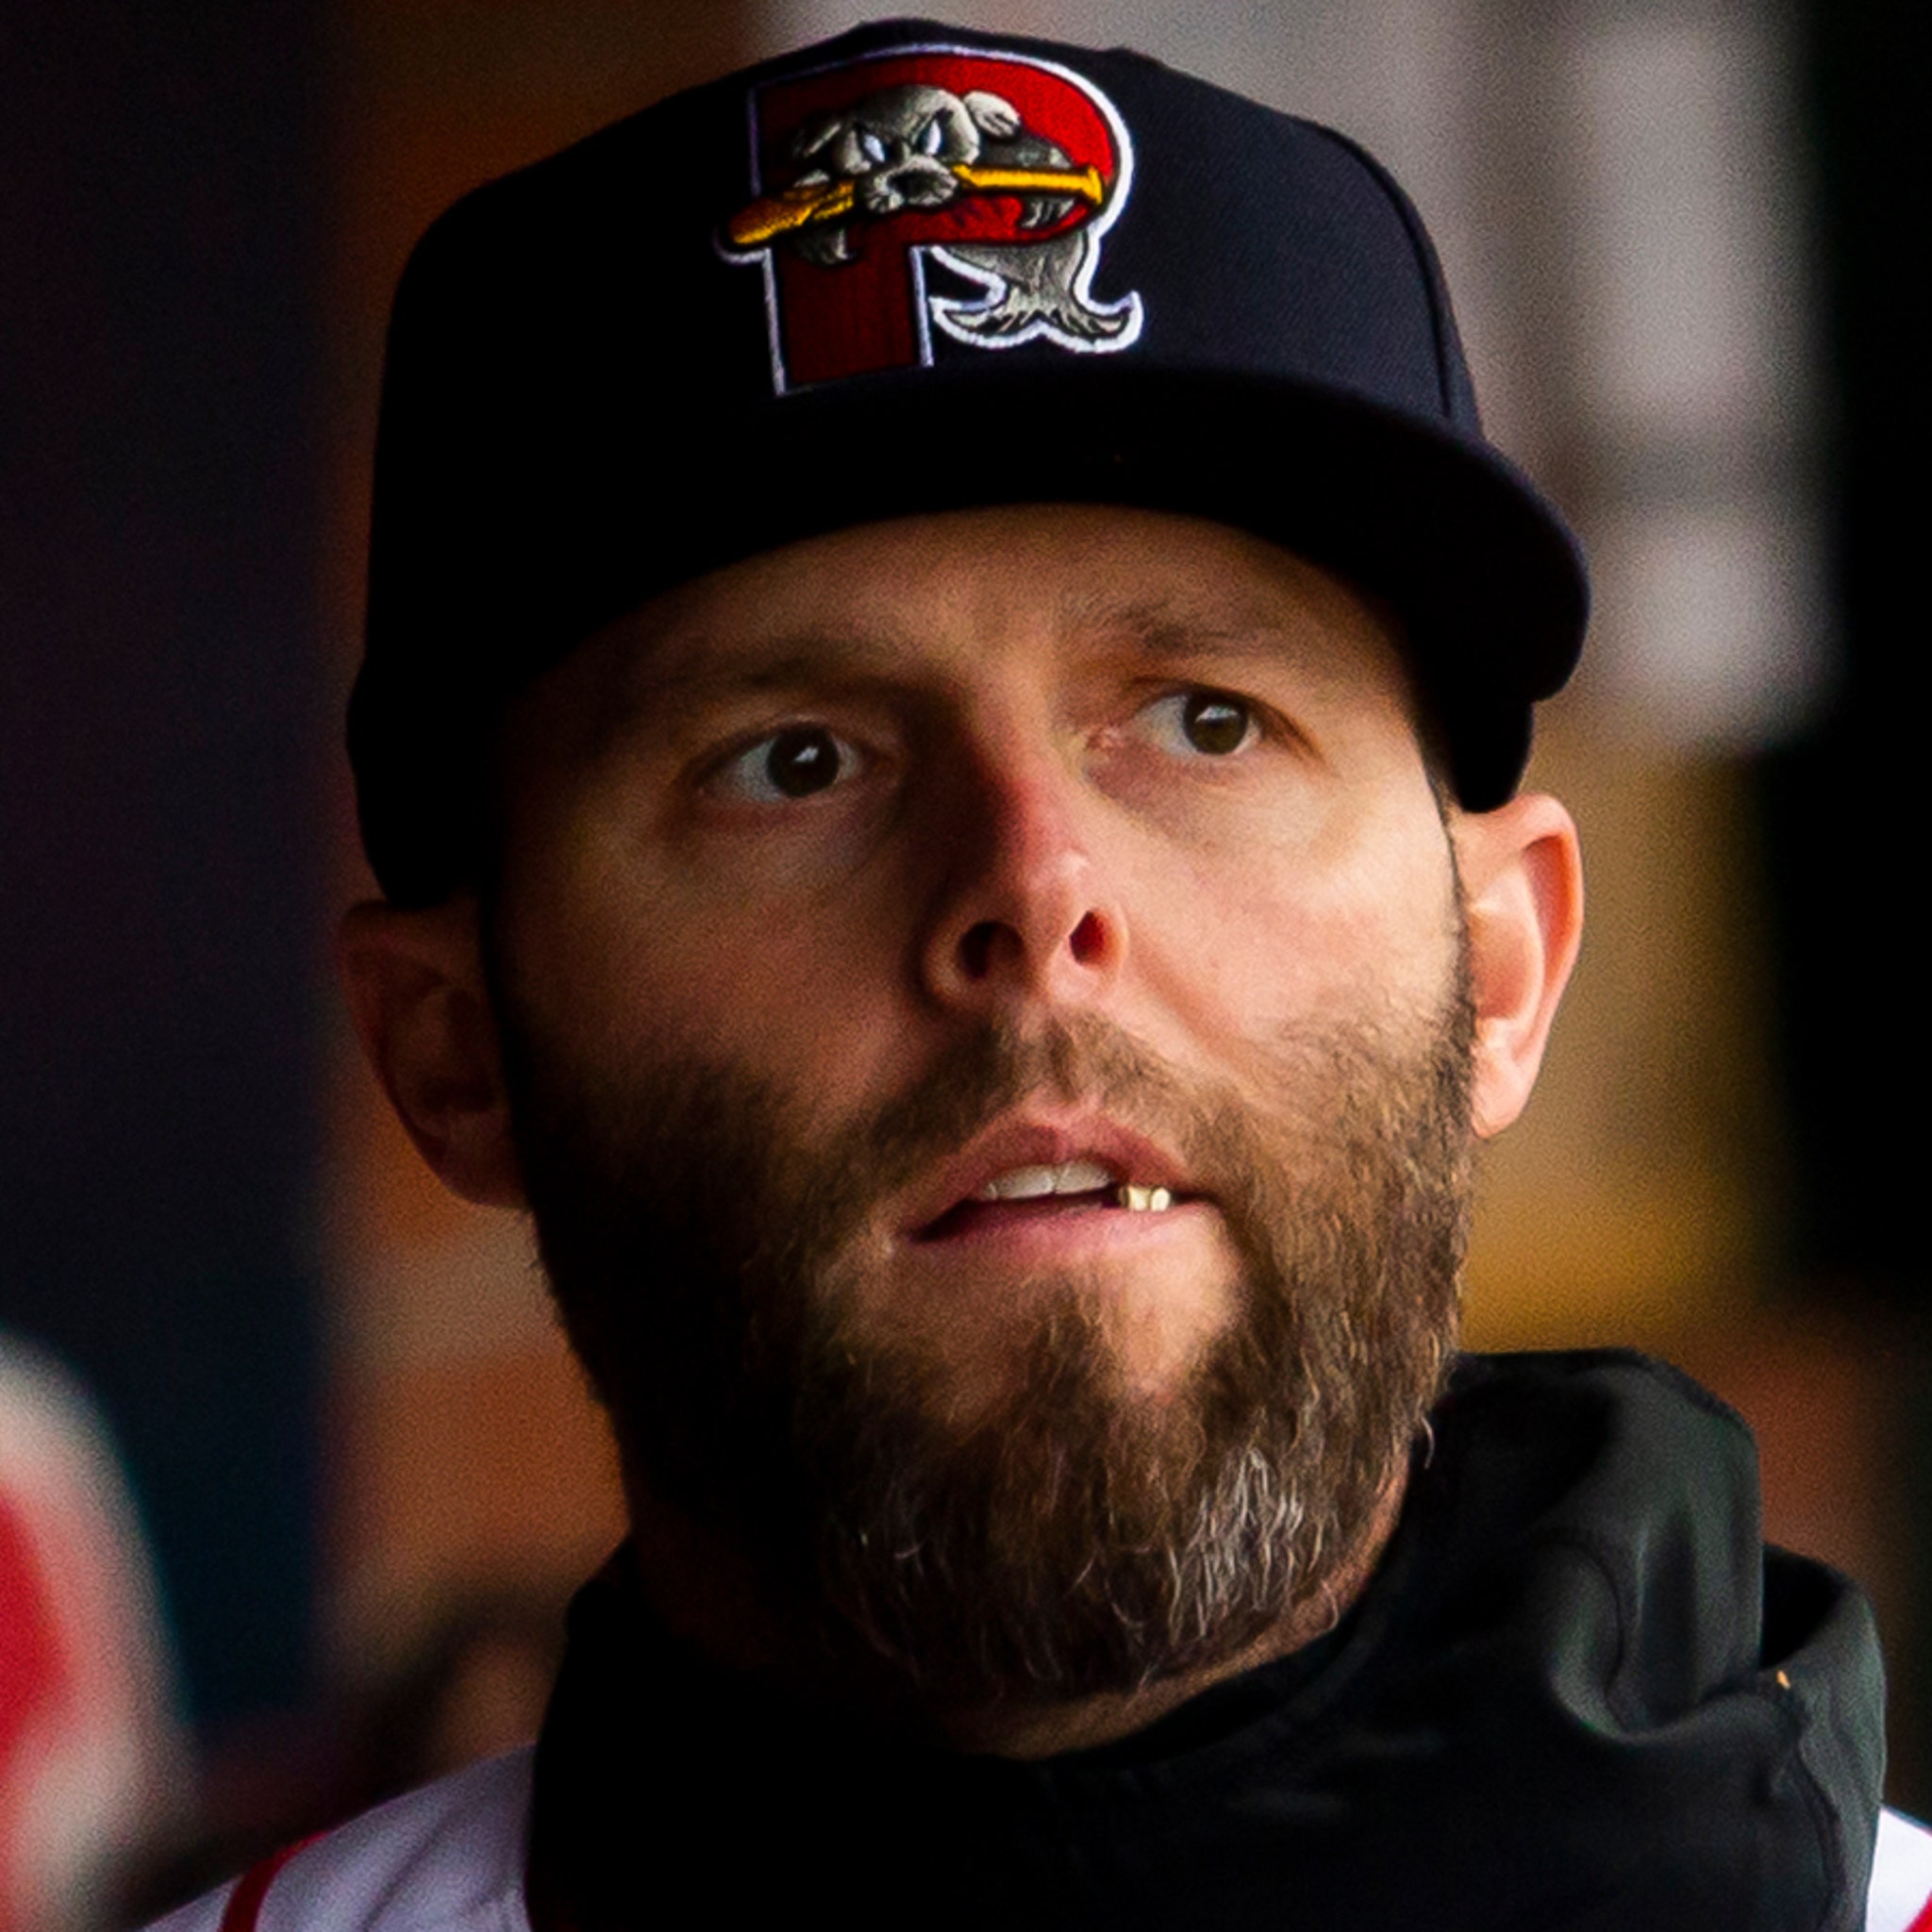 Dustin Pedroia retires after 14 years with Red Sox